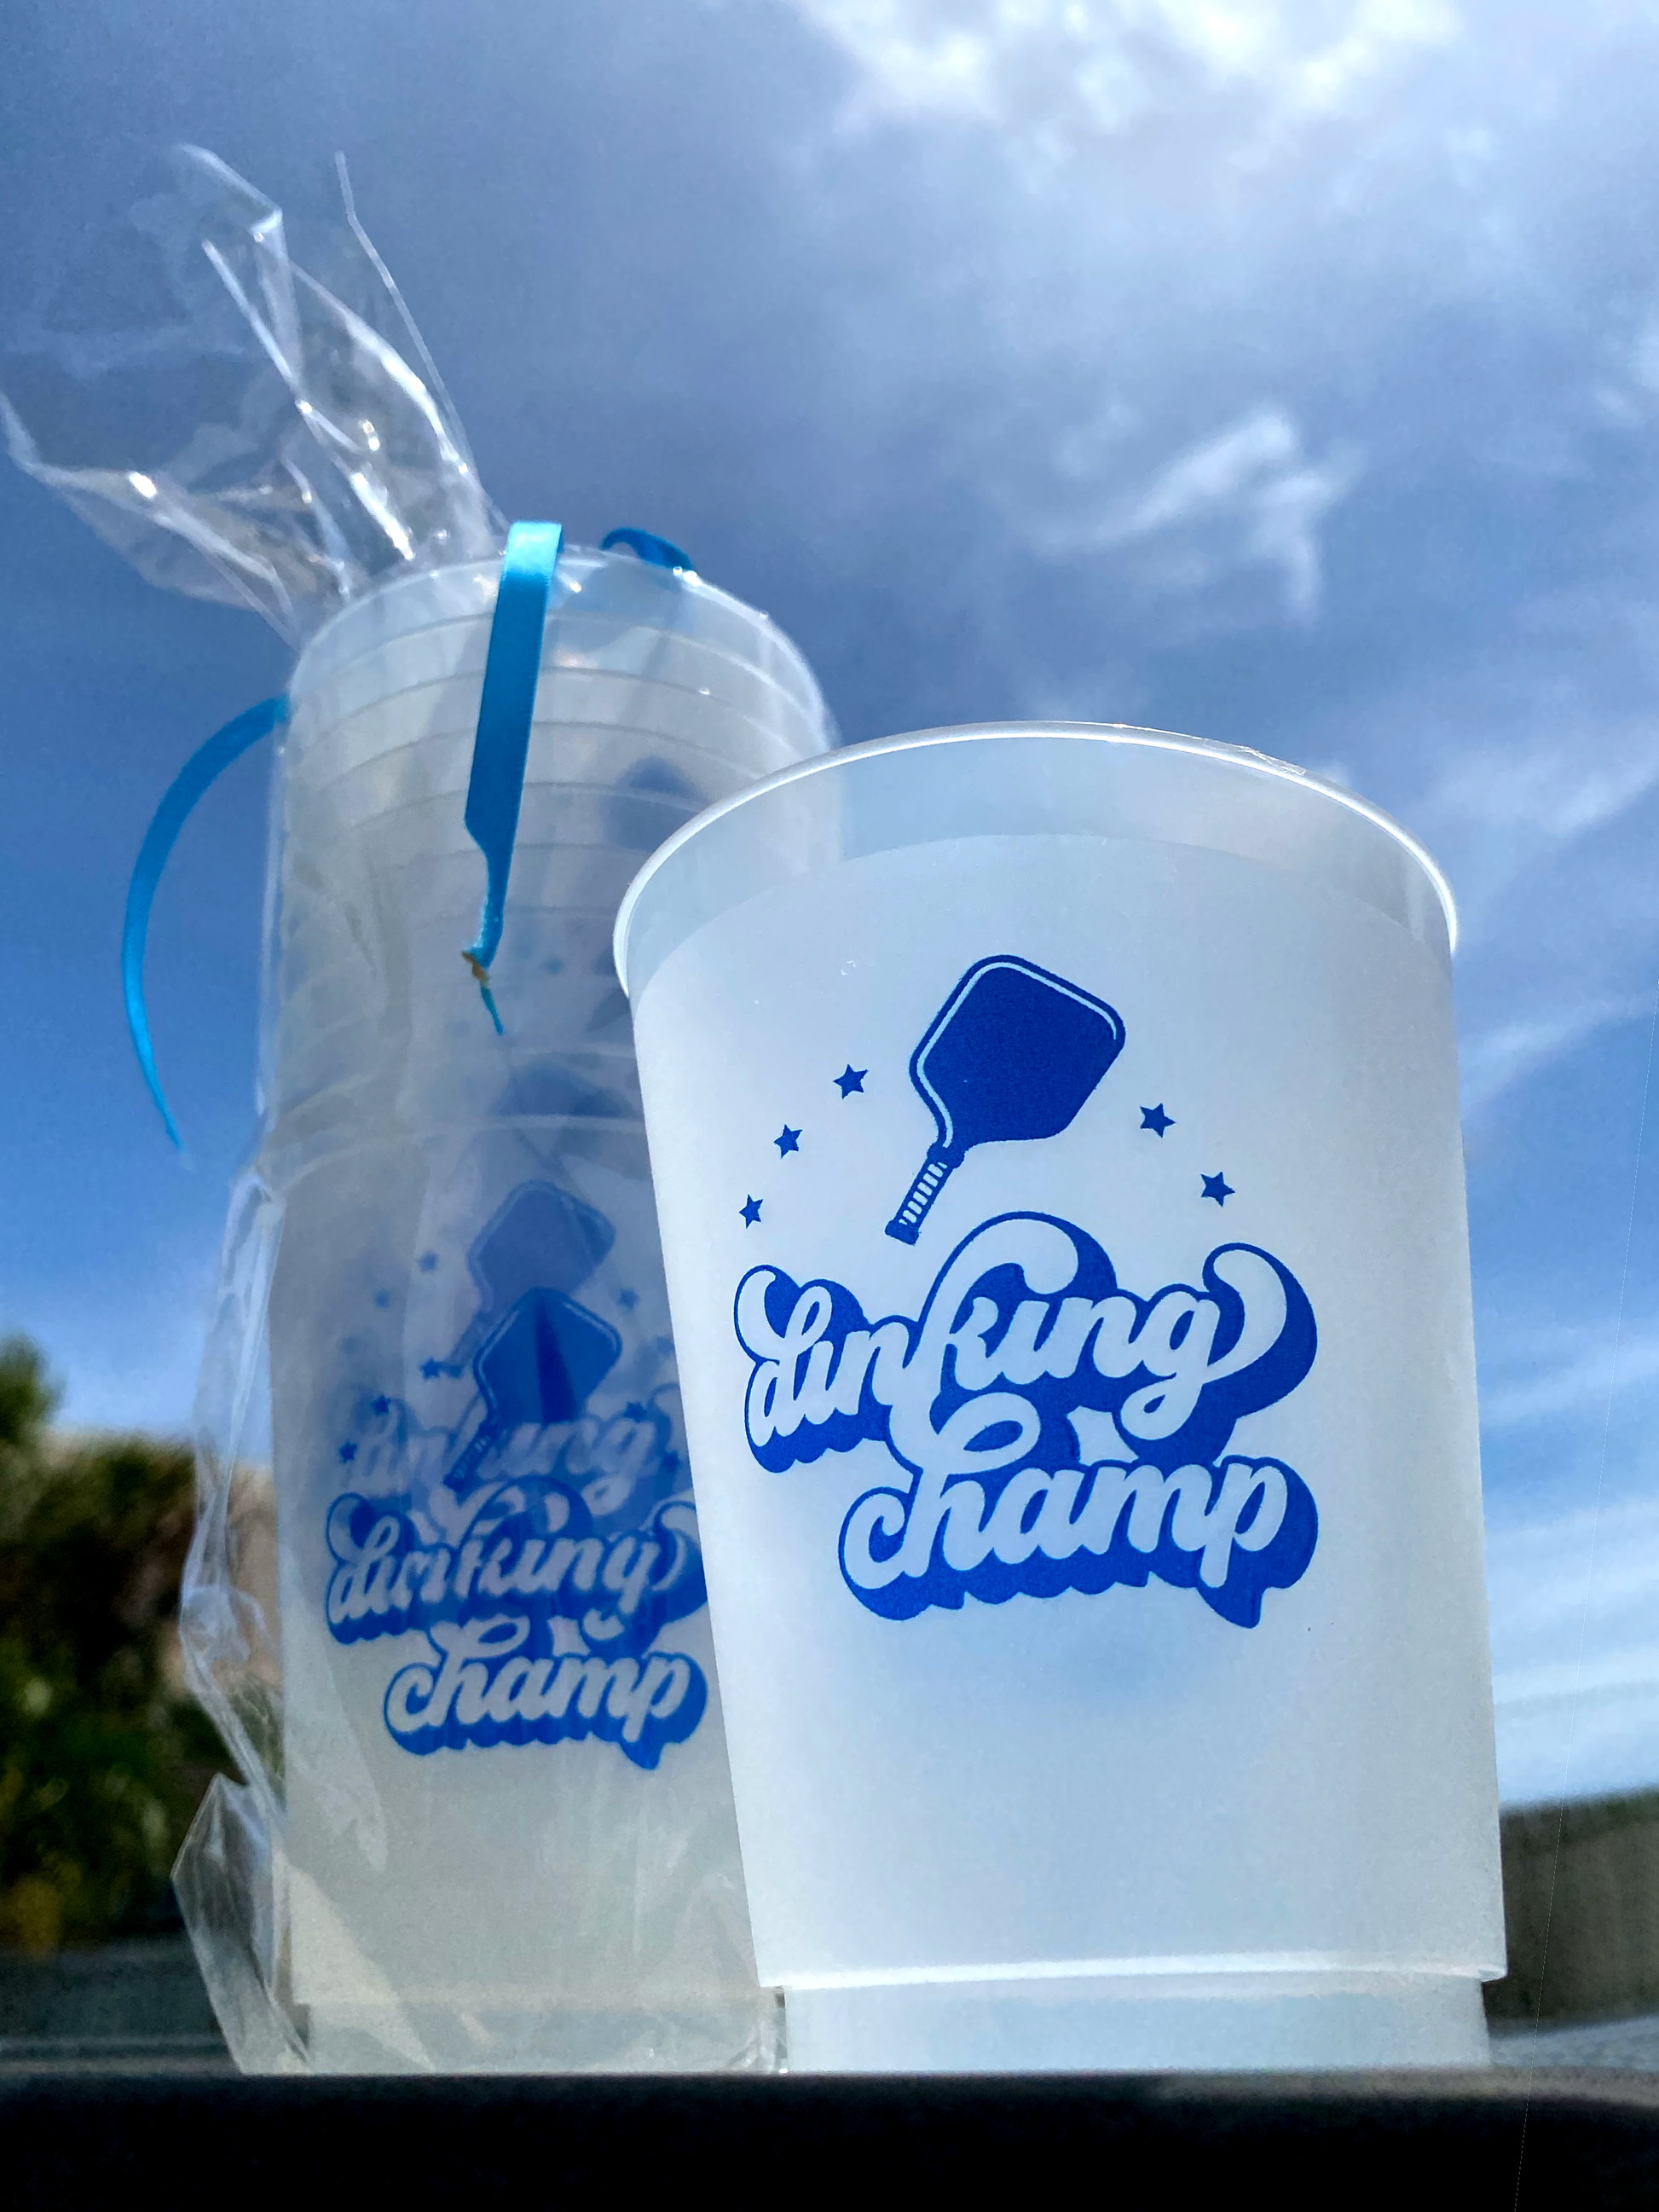 pickleball cup cups pickle ball gift dinks drinks gift gifts dinking champ dinks apres Swinton